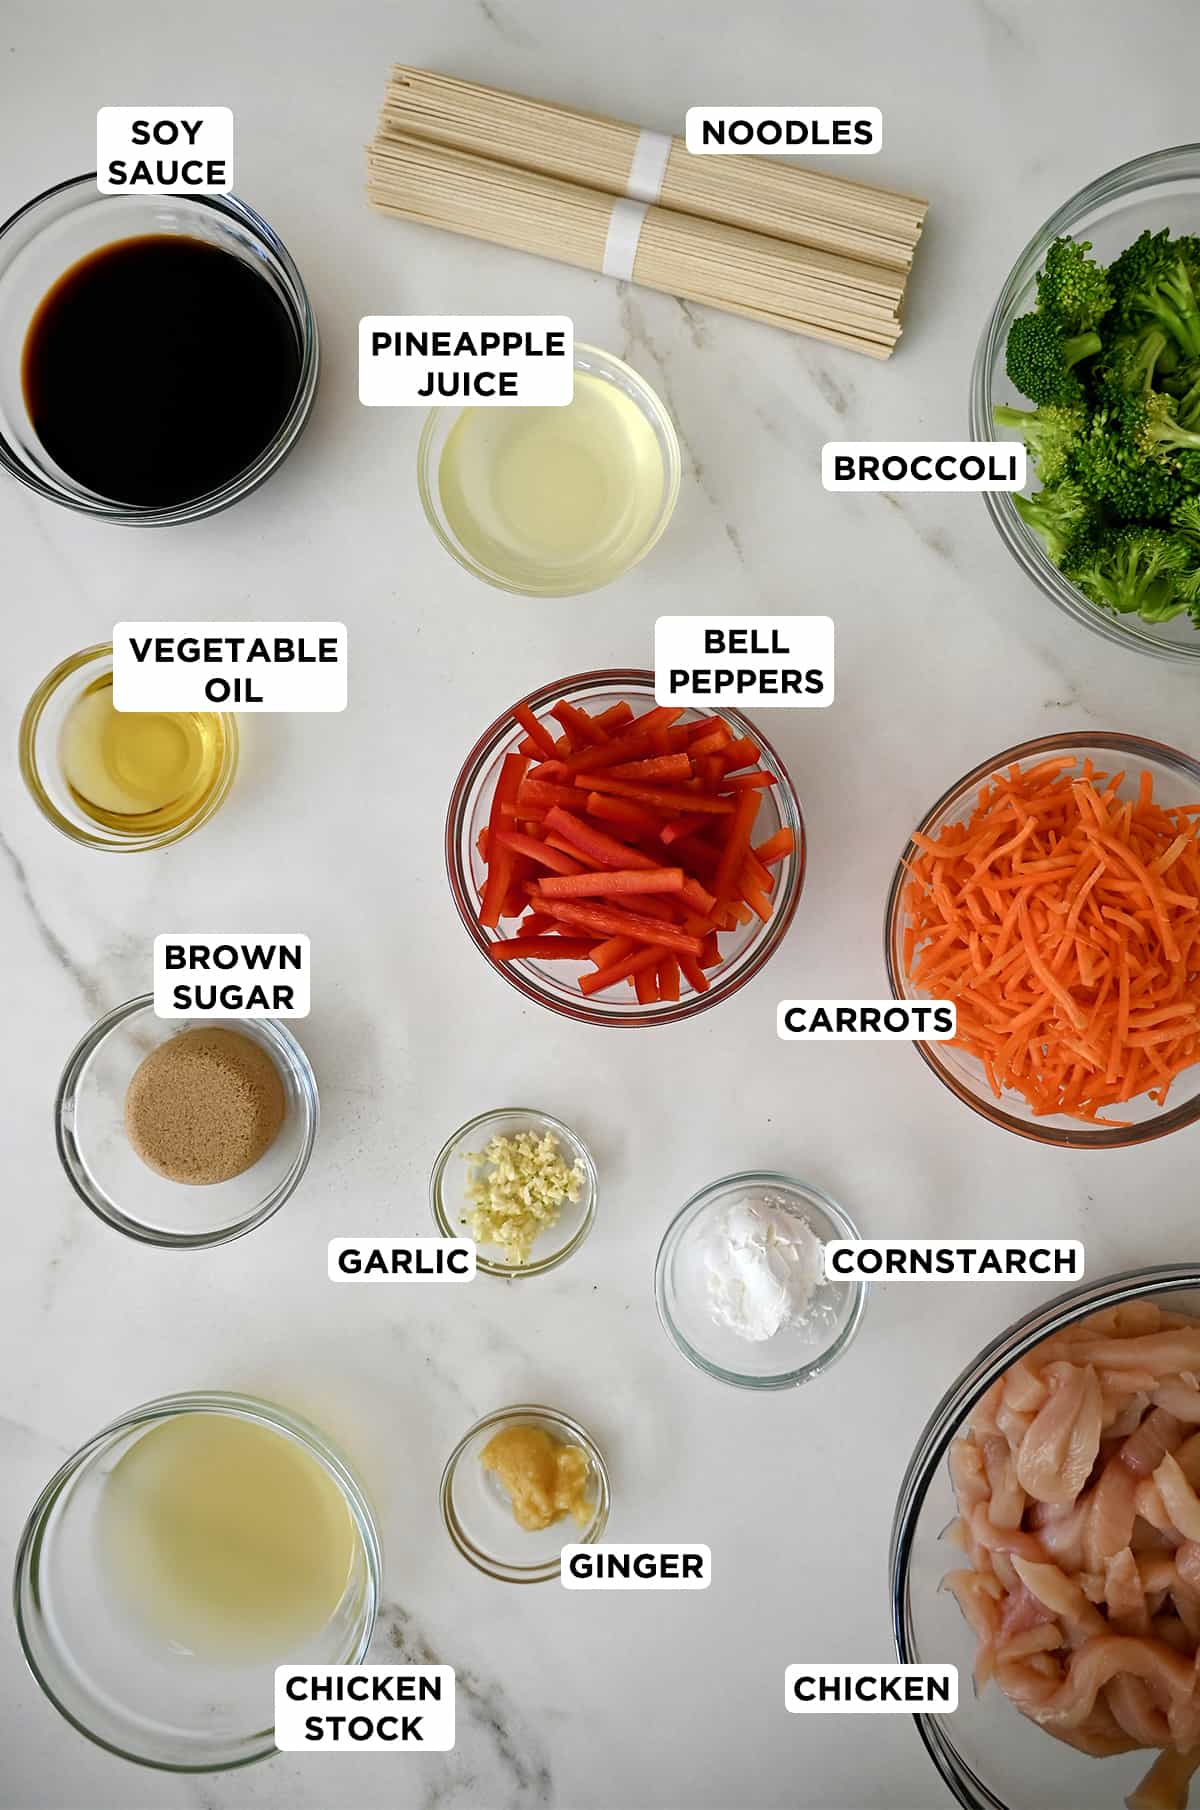 Various sizes of glass bowls containing ingredients for stir fry teriyaki chicken, including soy sauce, pineapple juice, broccoli, bell peppers, shredded carrots, cornstarch, minced garlic, brown sugar, vegetable oil, minced ginger, chicken stock, chicken breast slices and udon noodles. 